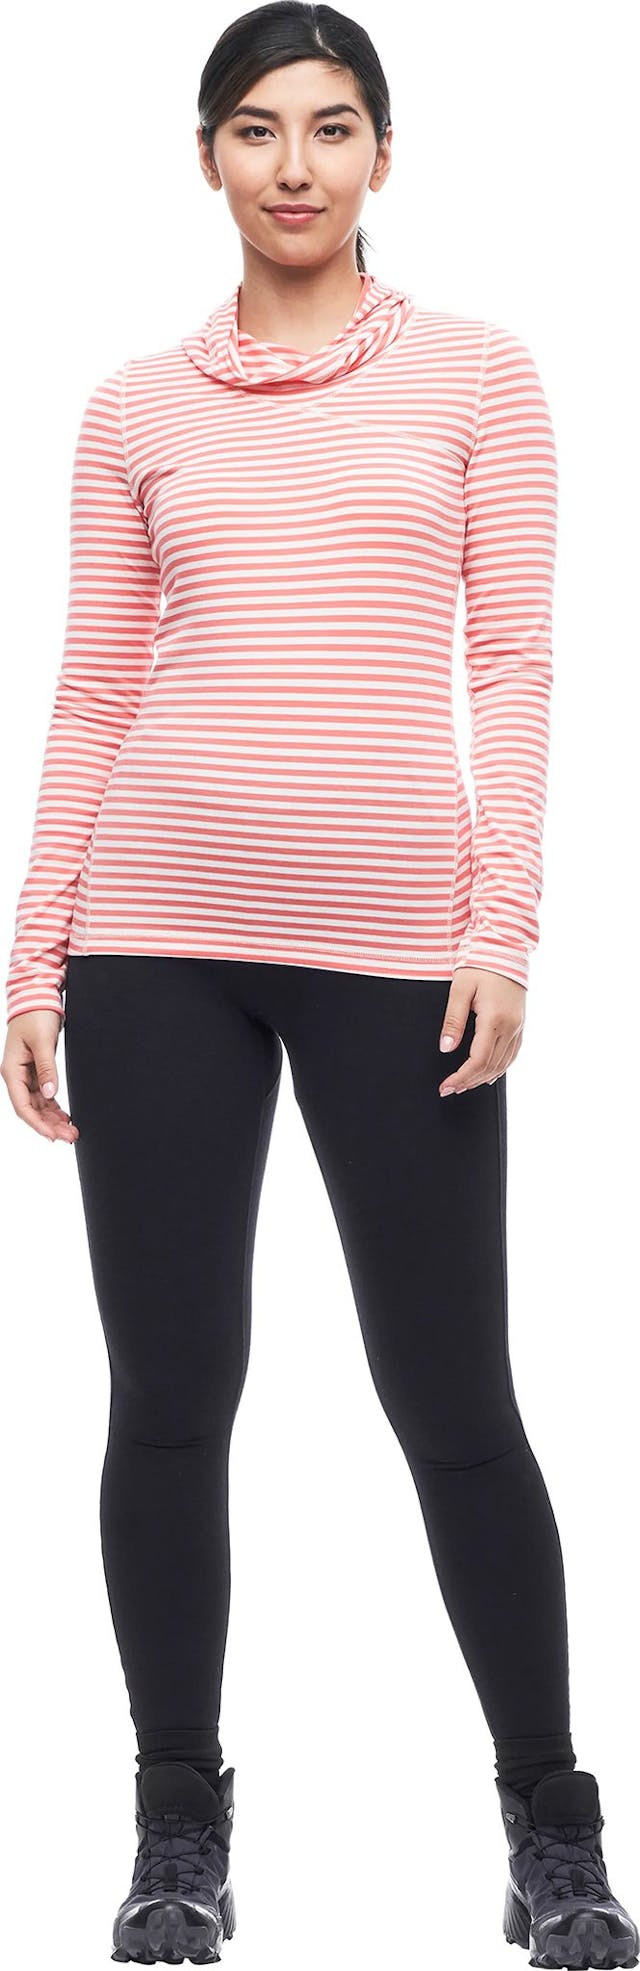 Product image for Tulum Long Sleeve Hooded Baselayer T-Shirt - Women's